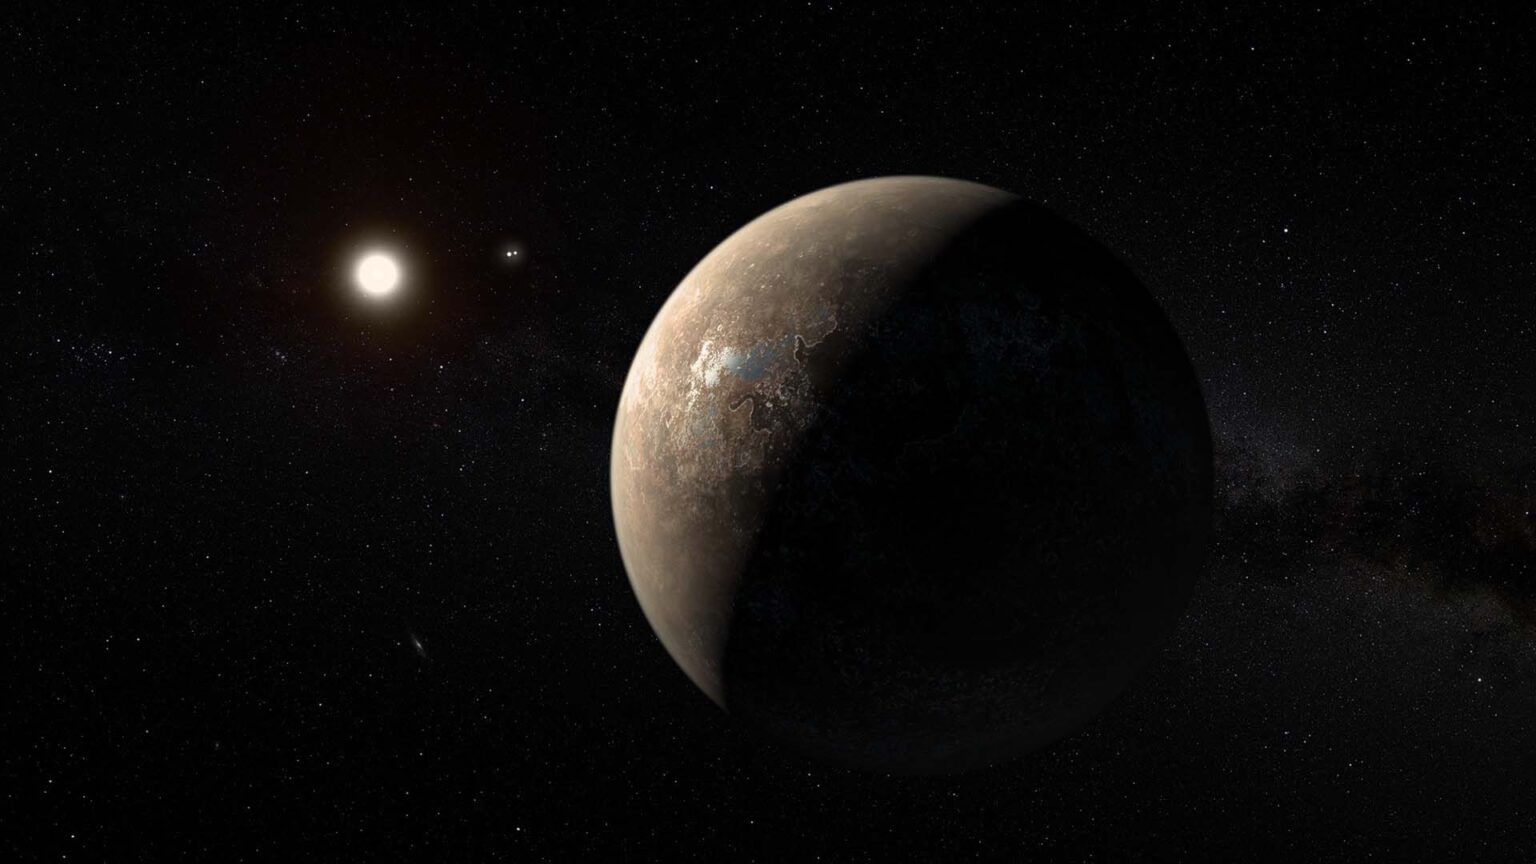 Could there be other life in the universe? NASA may have found an inhabited planet. Discover whether or not we'll meet aliens soon.